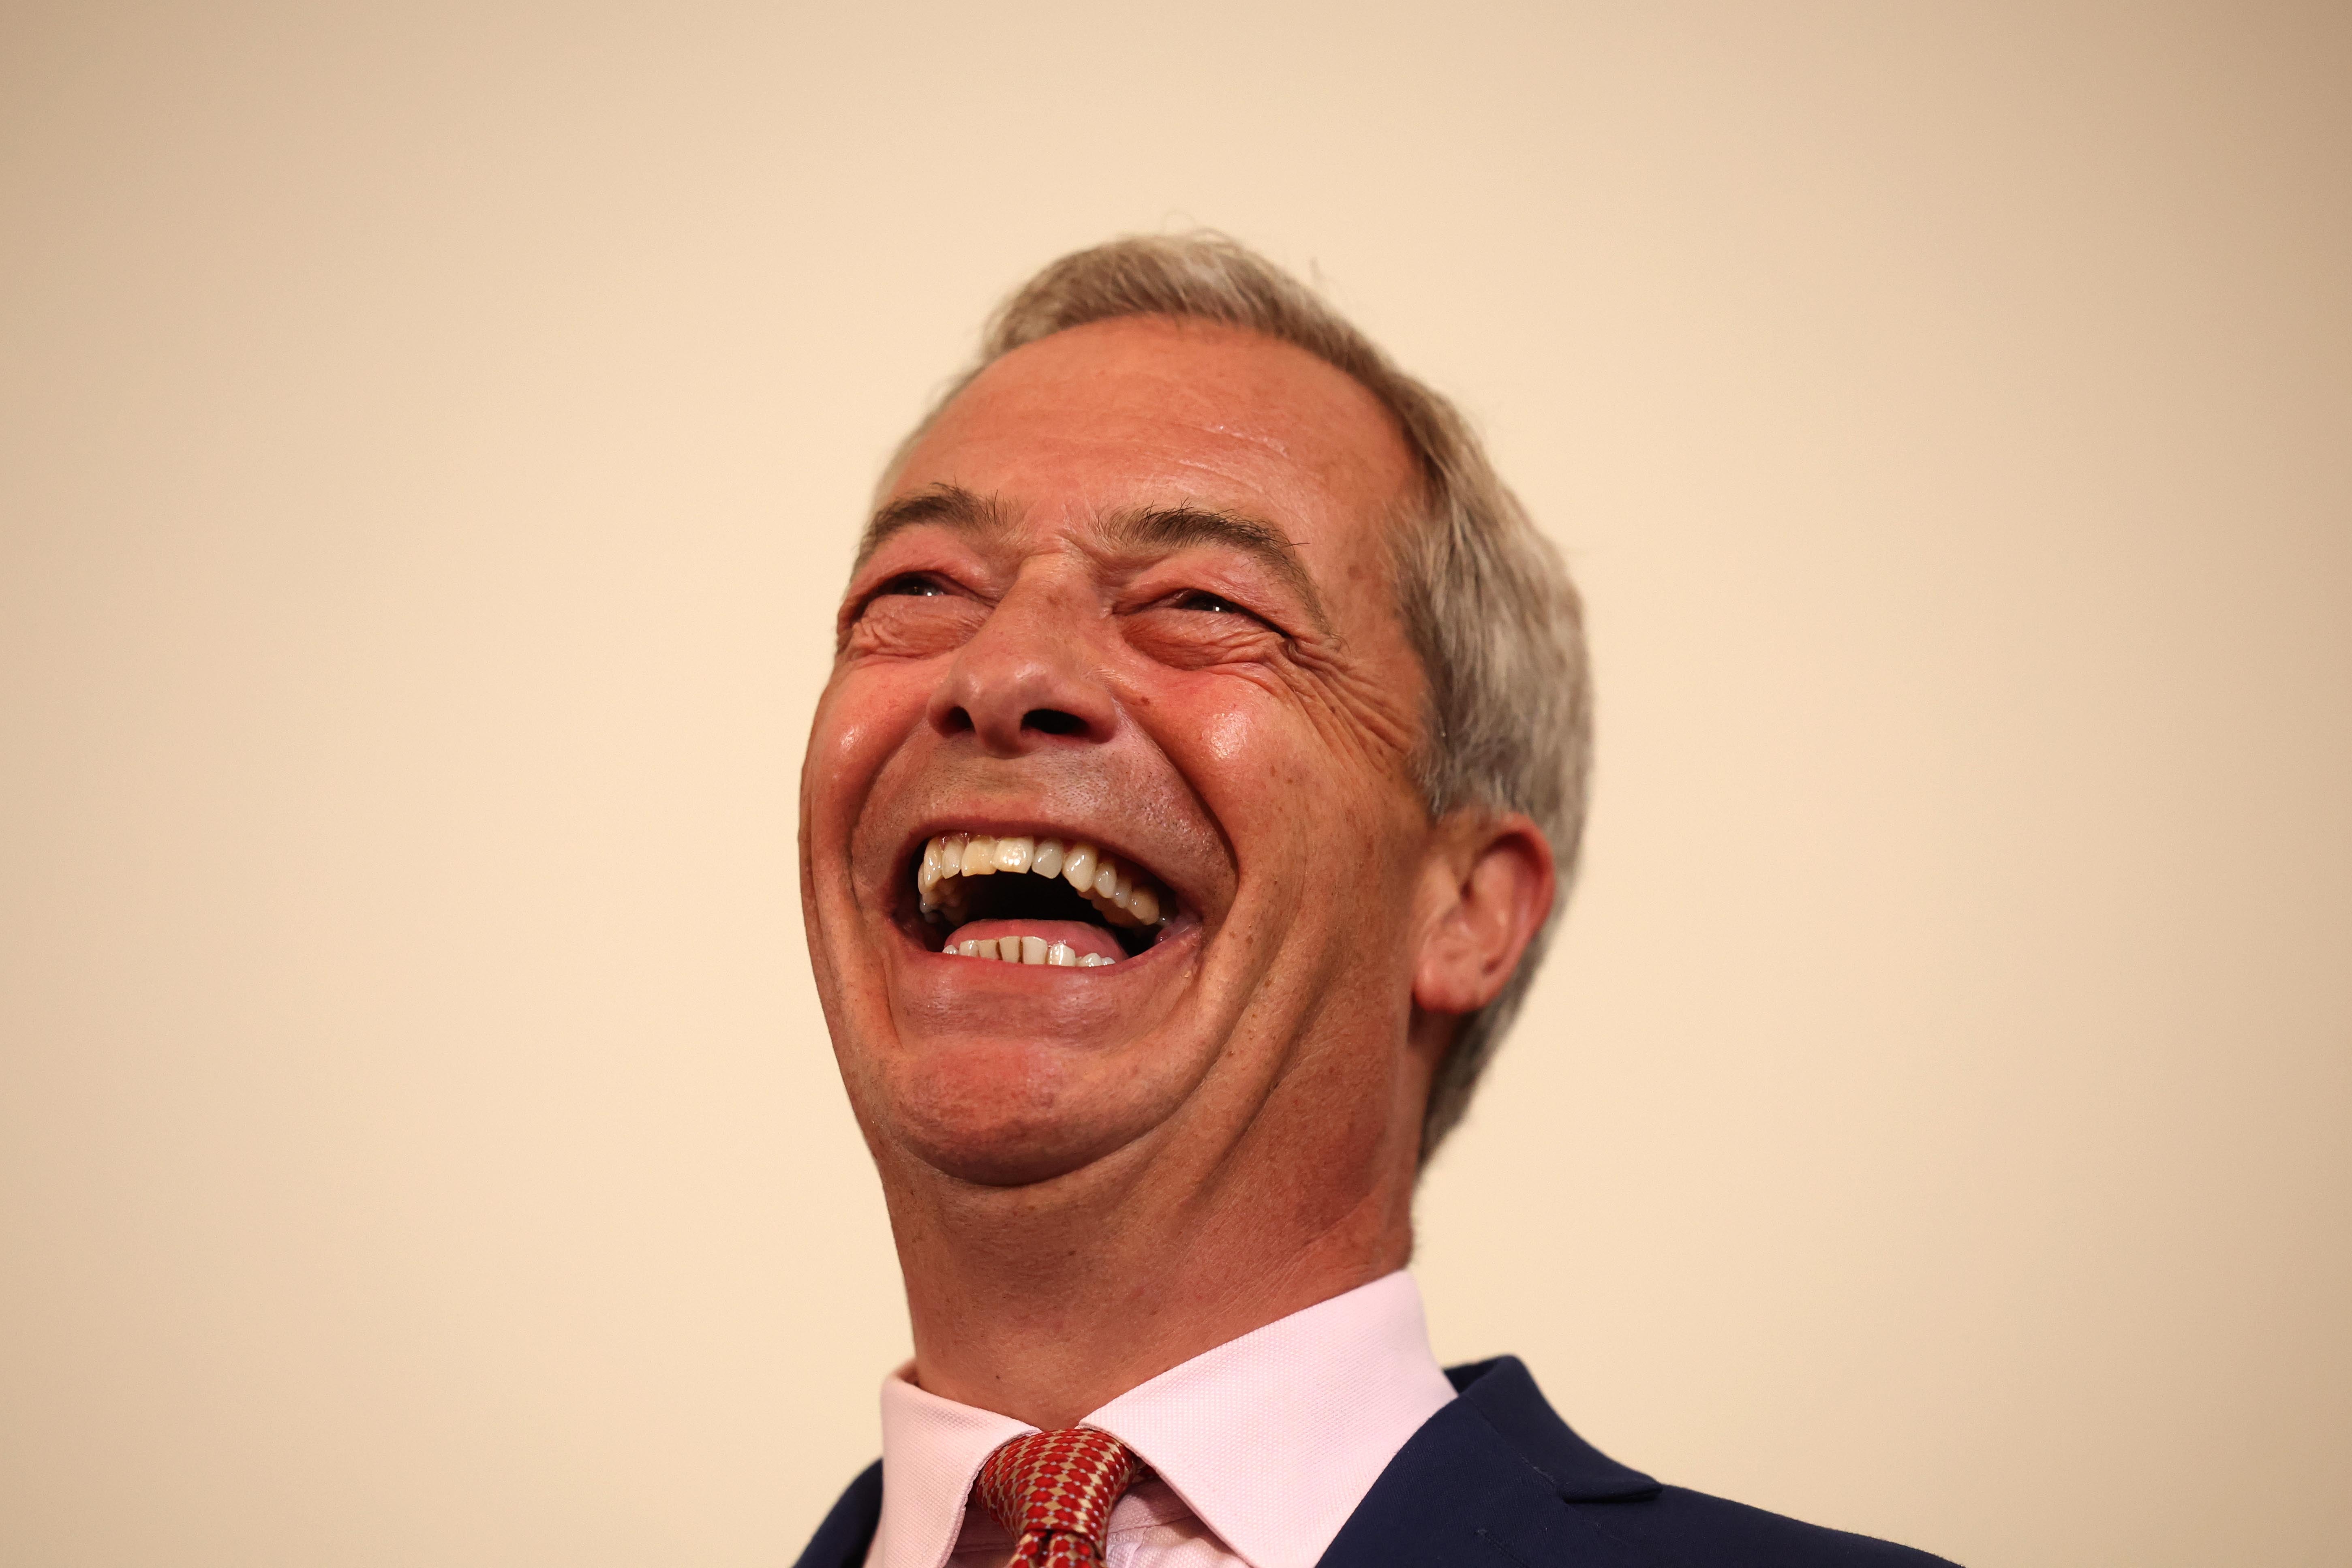 The debate in Clacton is over who can beat Reform UK candidate Farage